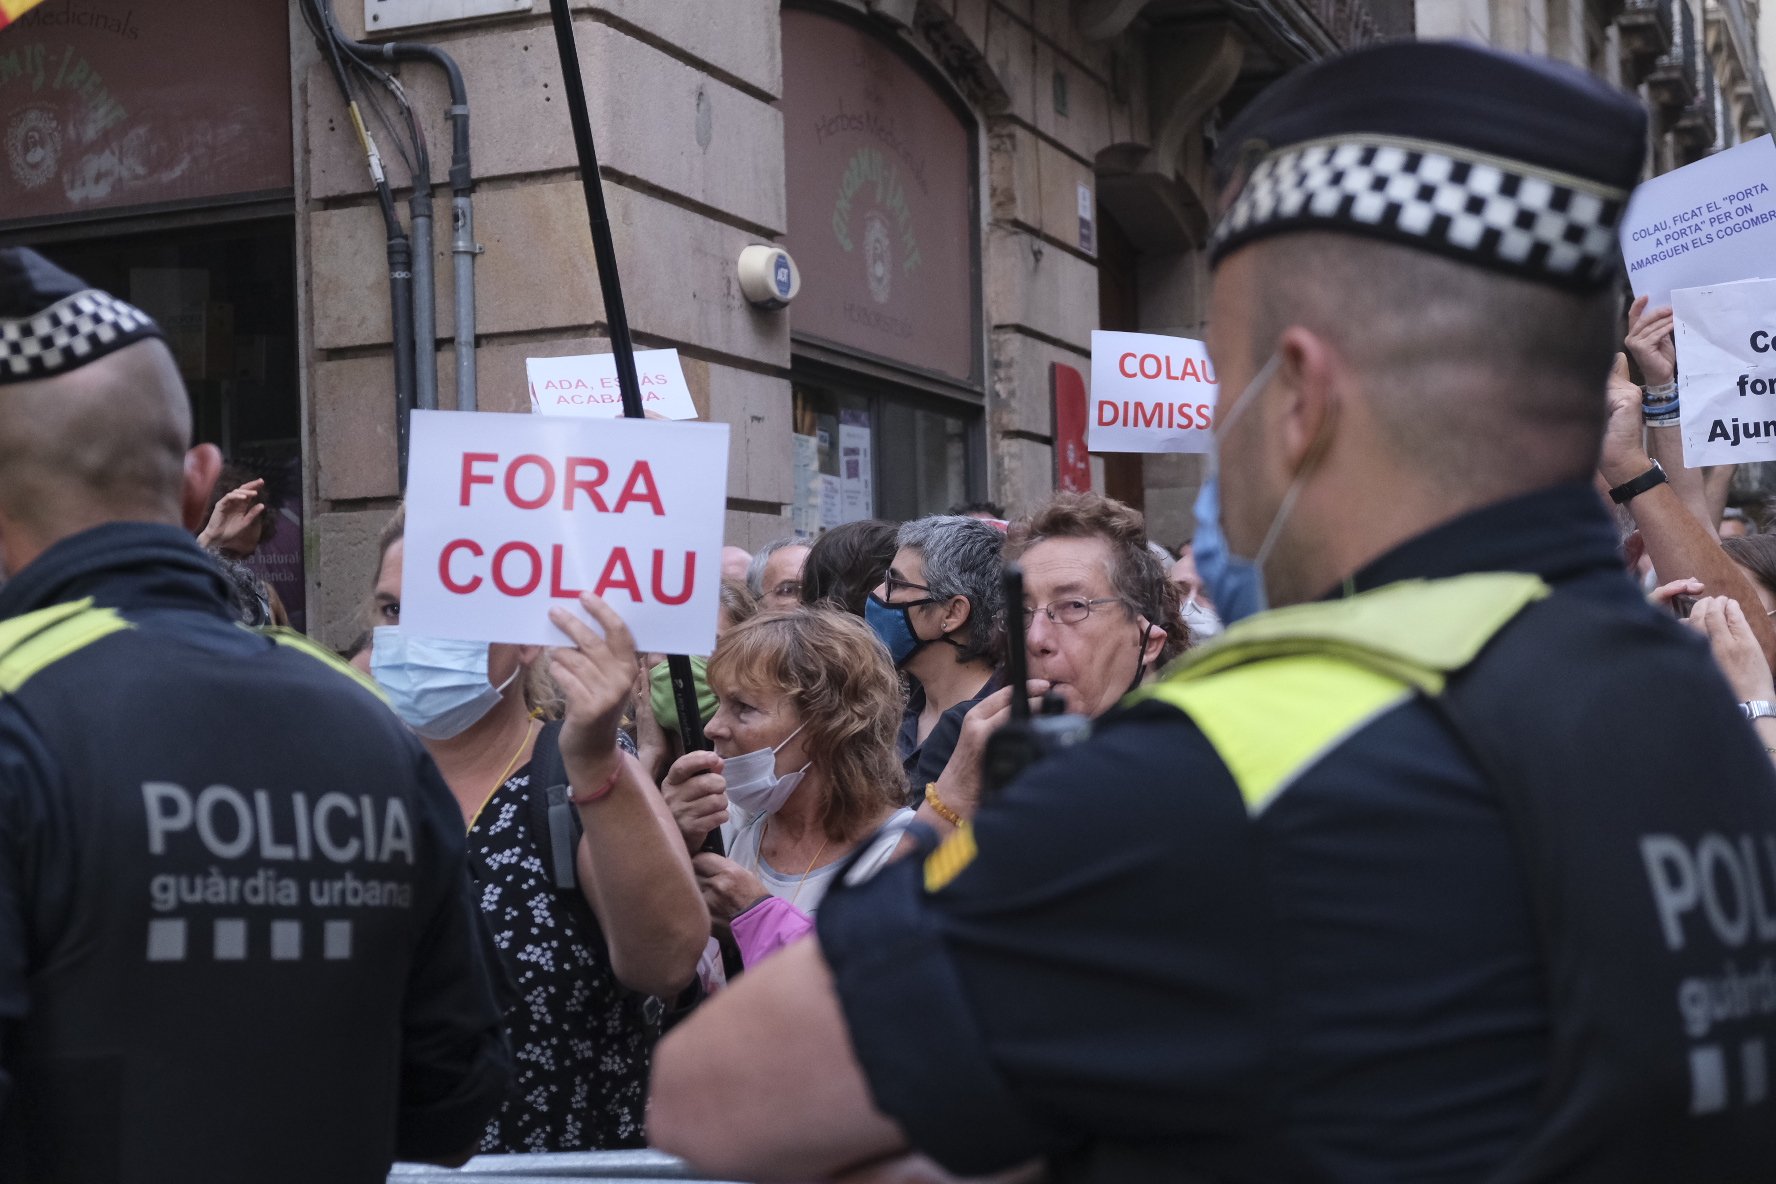 Eighty Barcelona groups call time on Colau with protest planned for 21st October